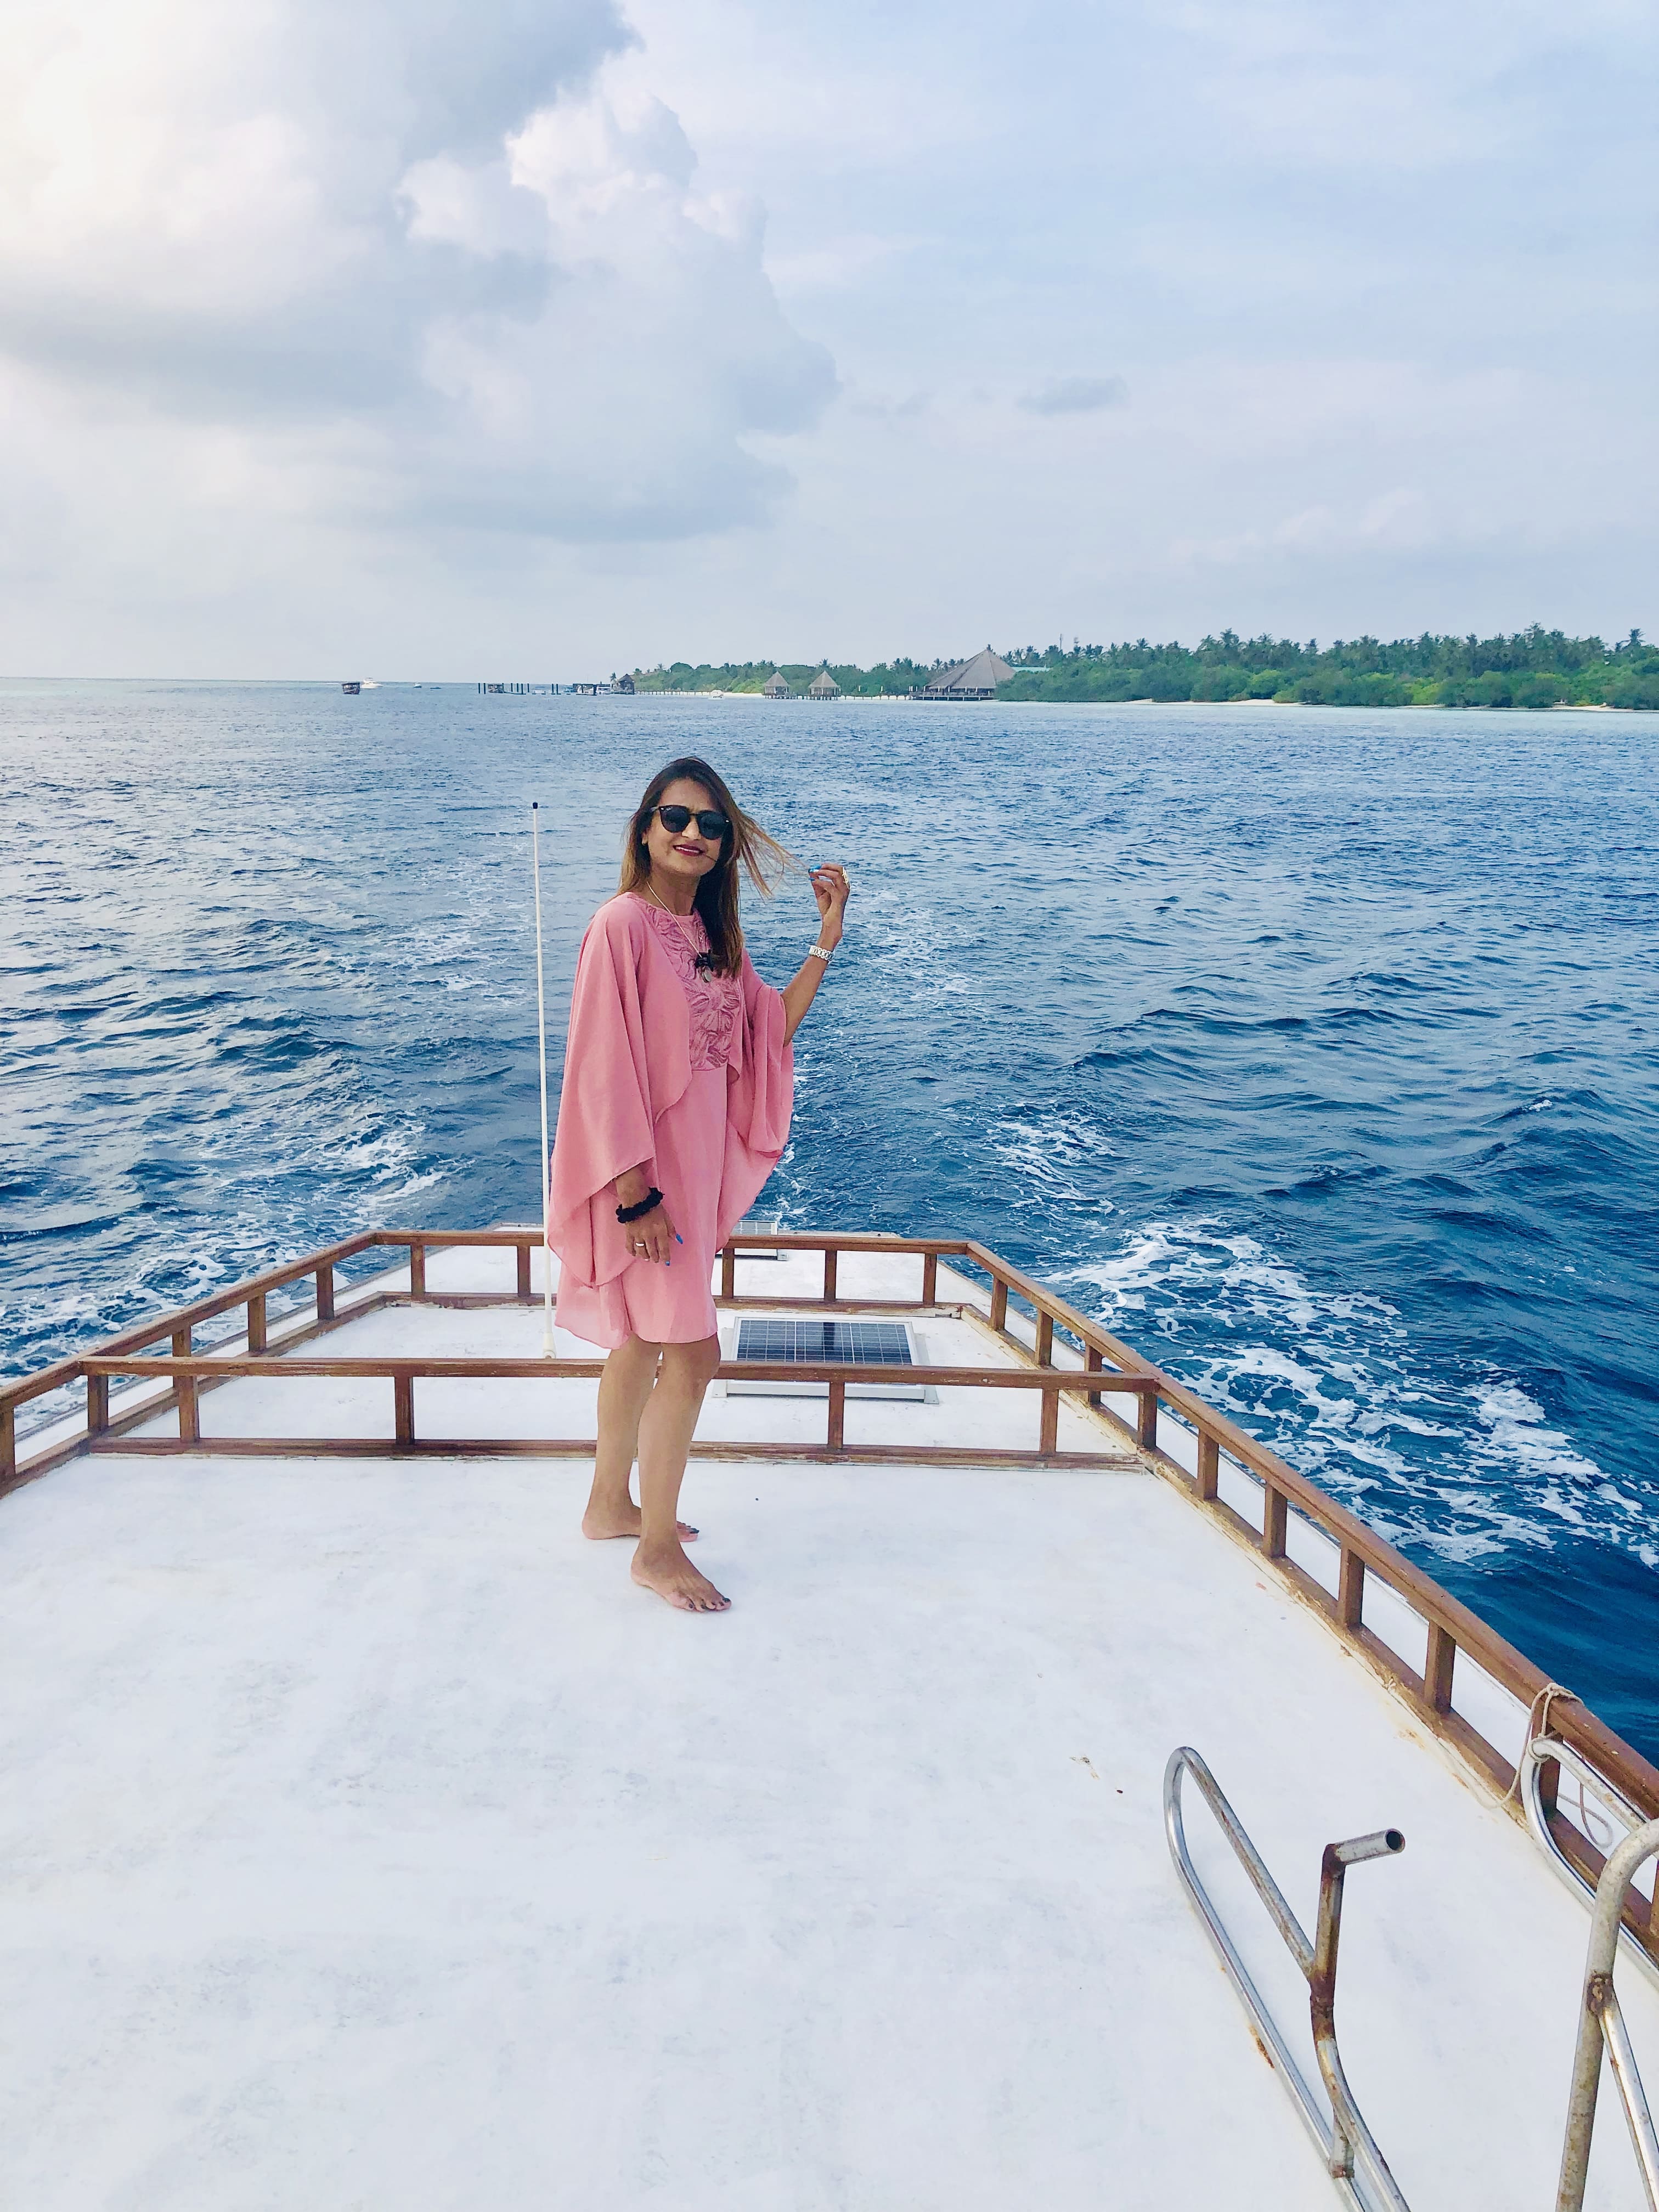 Life In An Island Paradise - Rinnku’s Ode To The Charm Of The Maldives ...